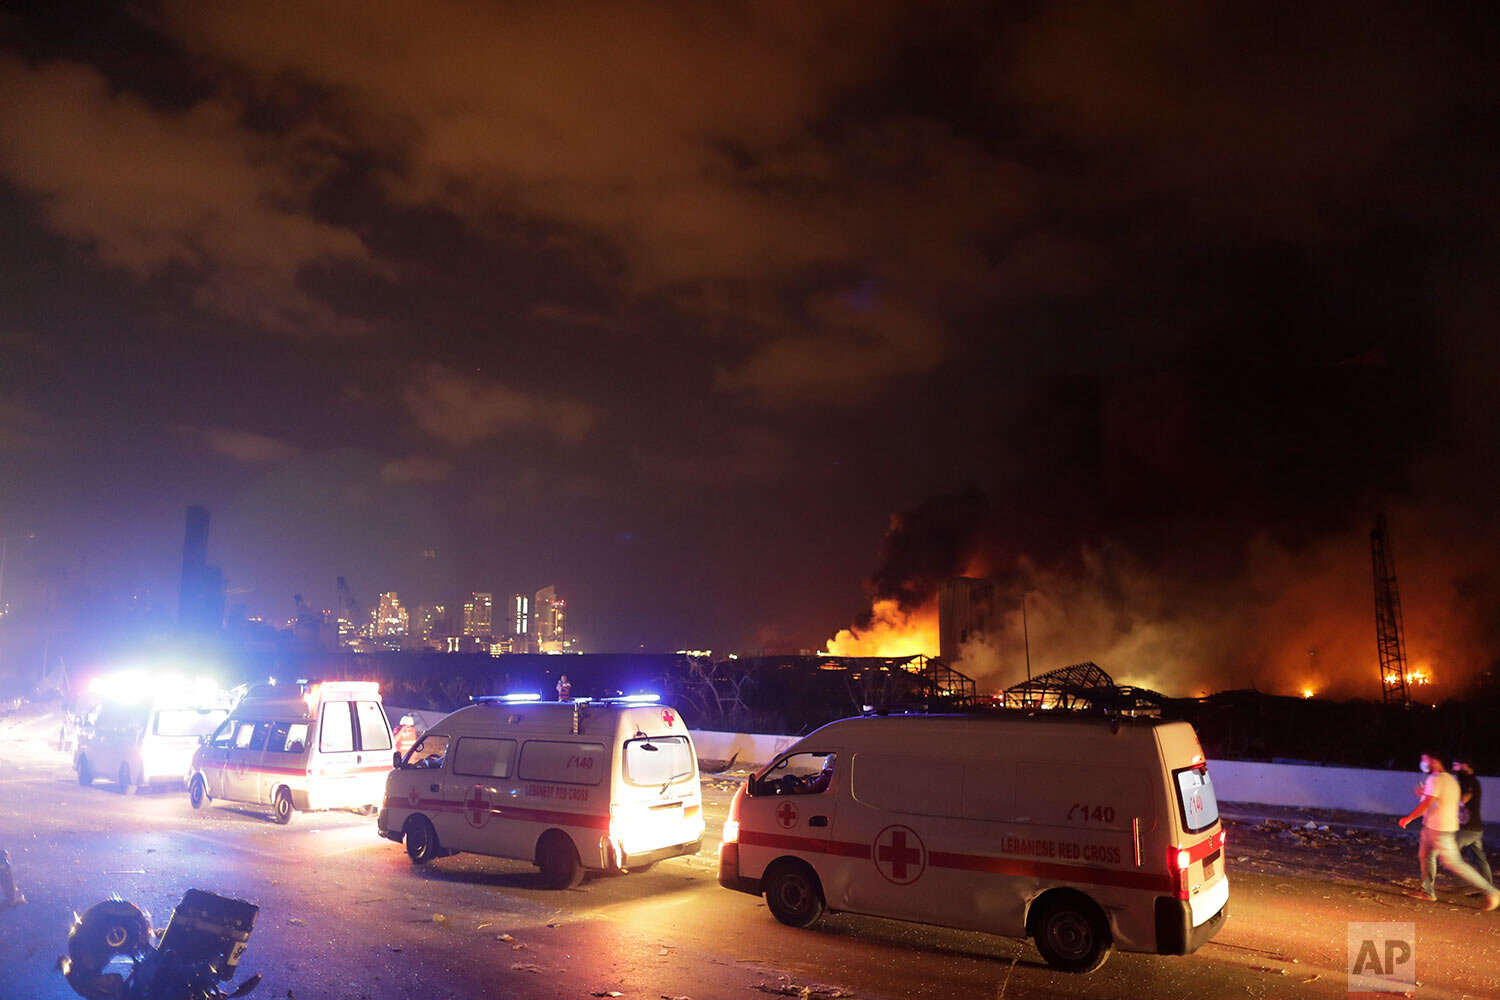  Ambulances drive past the site of a massive explosion in Beirut, Lebanon, Tuesday, Aug. 4, 2020. (AP Photo/Hassan Ammar) 